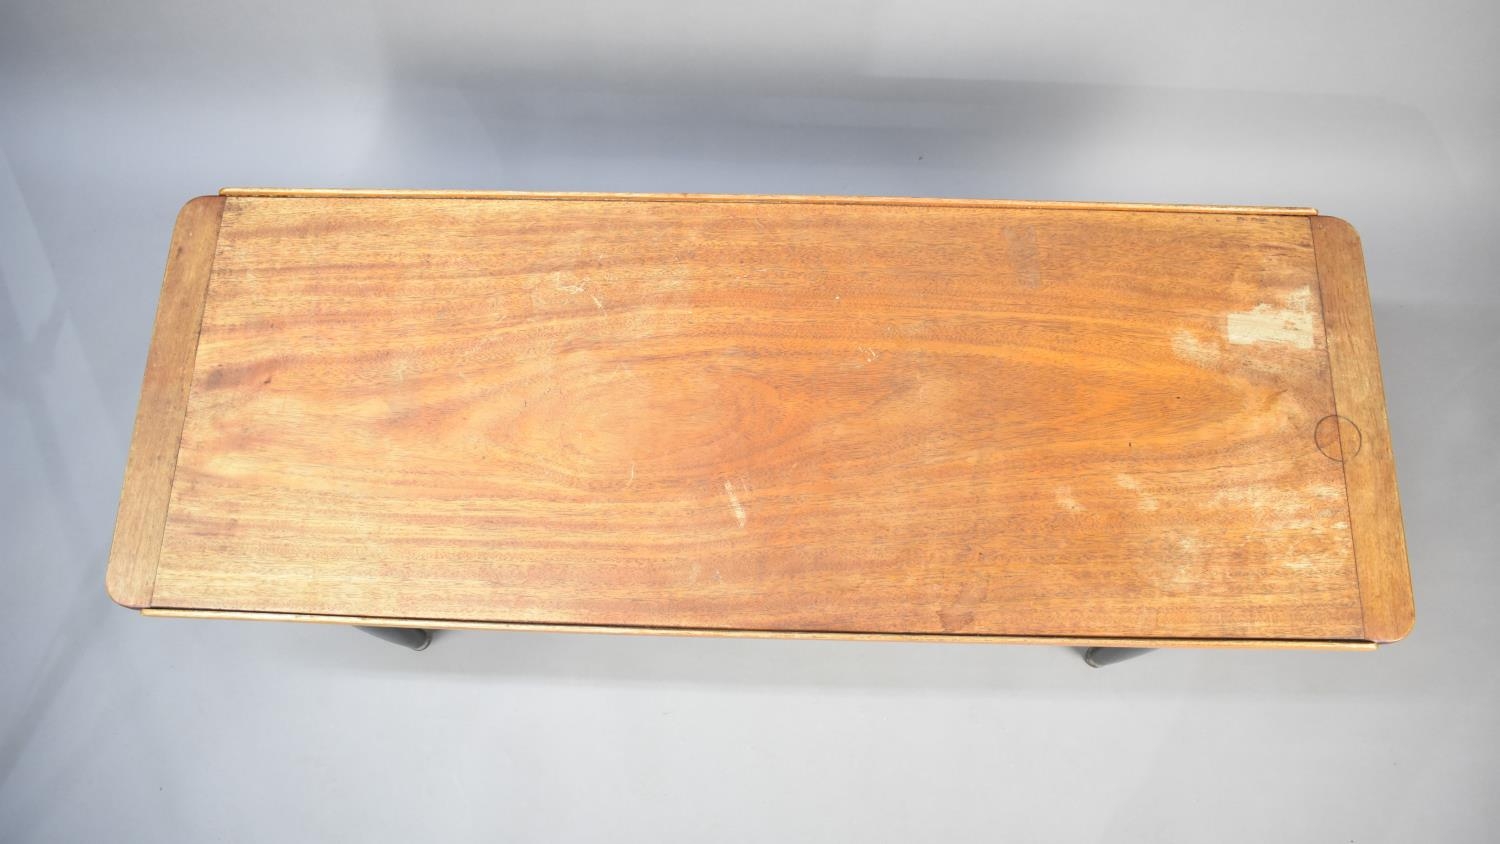 A 1970s Teak Topped Coffee Table, 137x50cms - Image 2 of 2